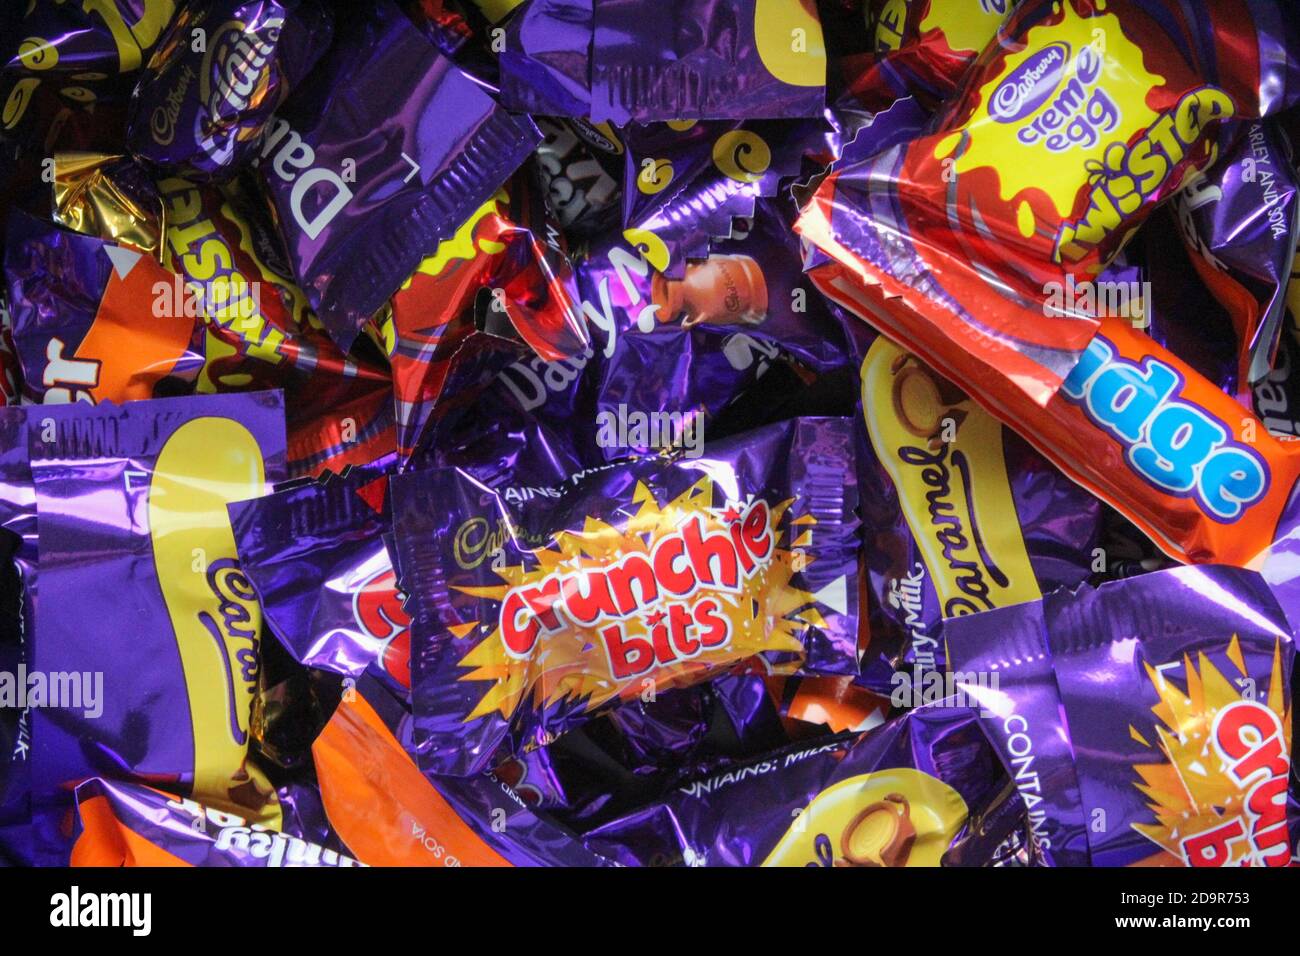 Close-up of the variety of chocolates from a box of Cadbury's Heroes Stock Photo